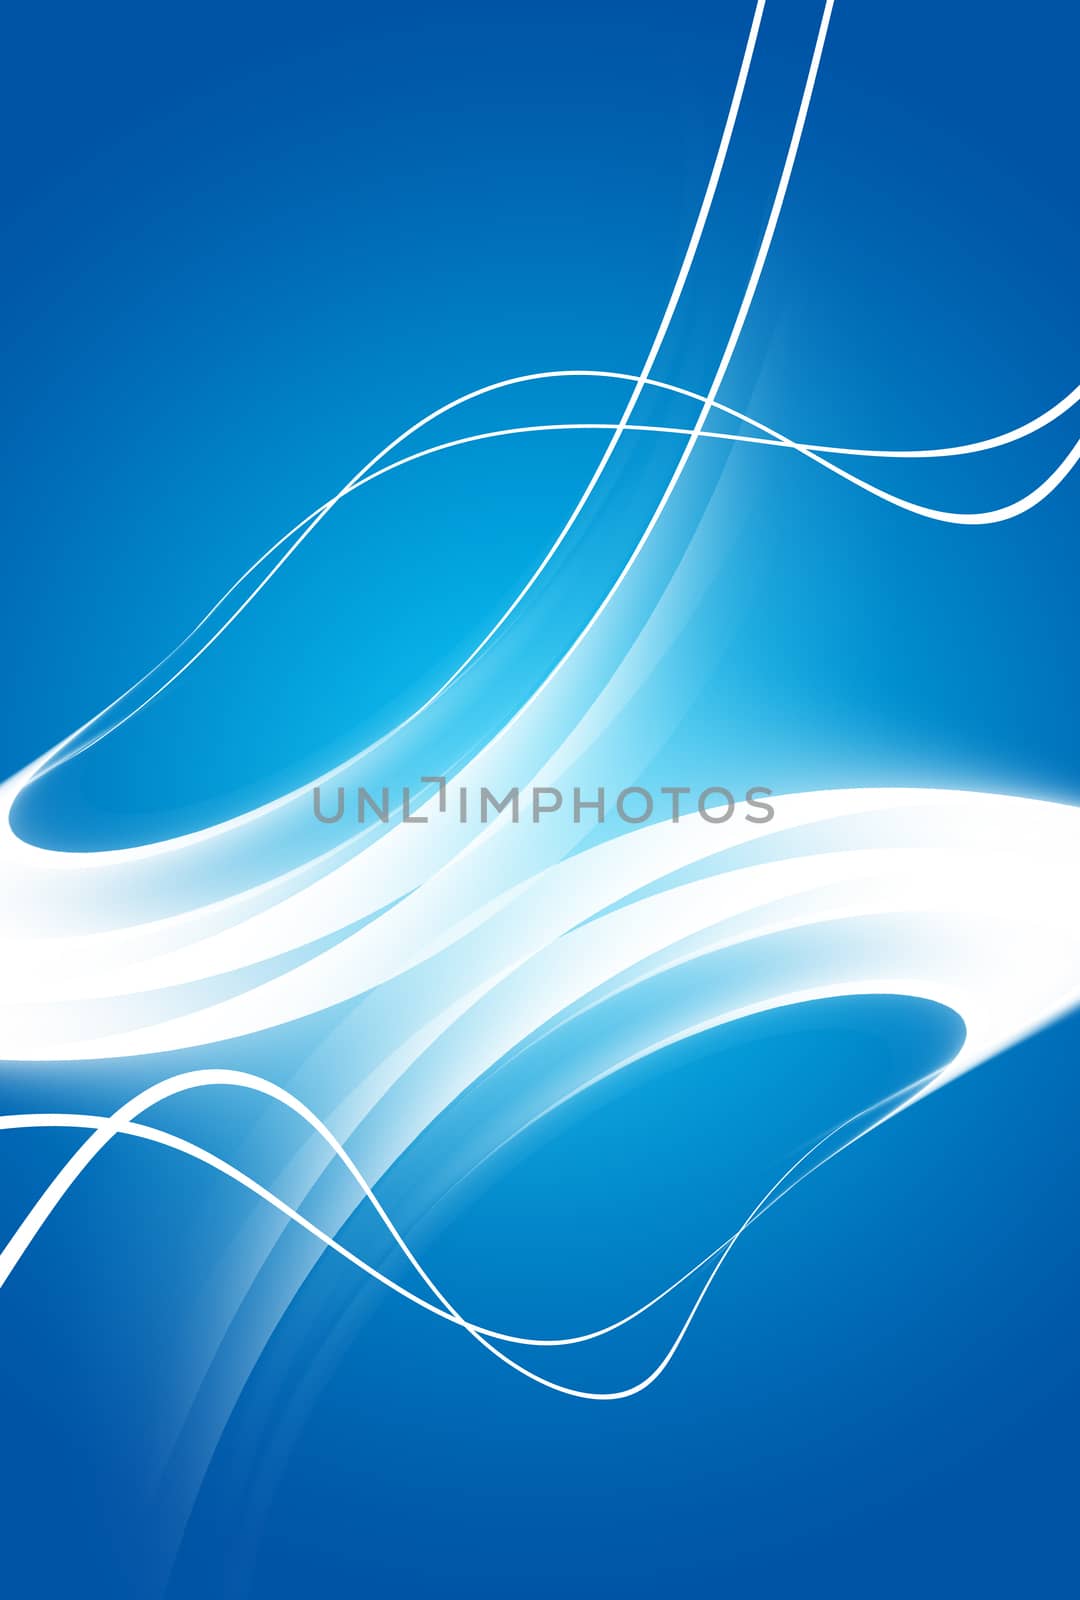 Abstract blue background with glowing white curves